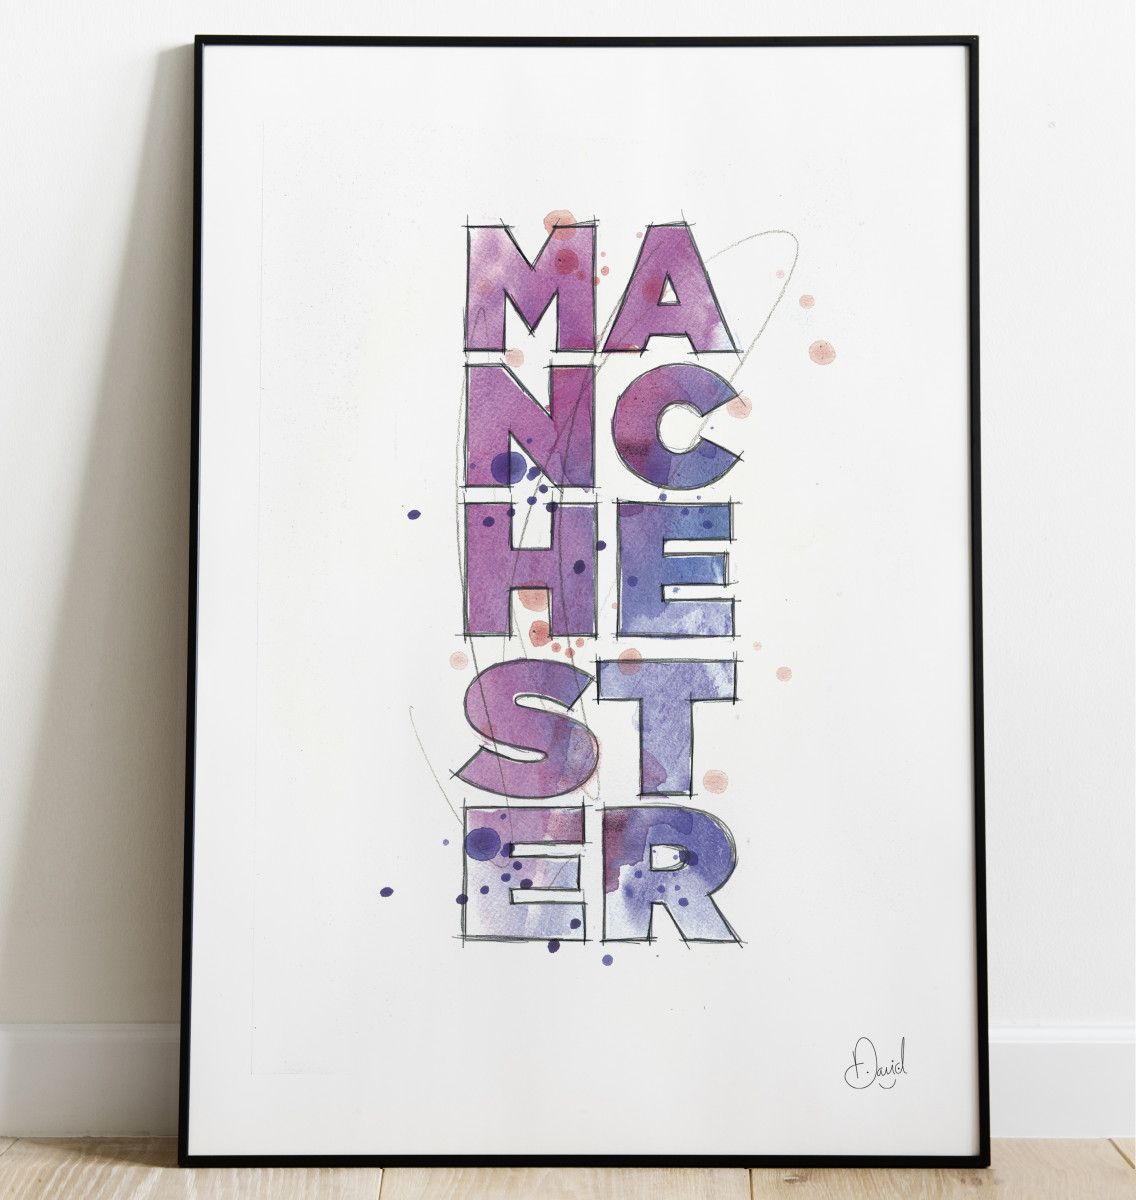 Manchester - Such a beautiful word - Typographic art print